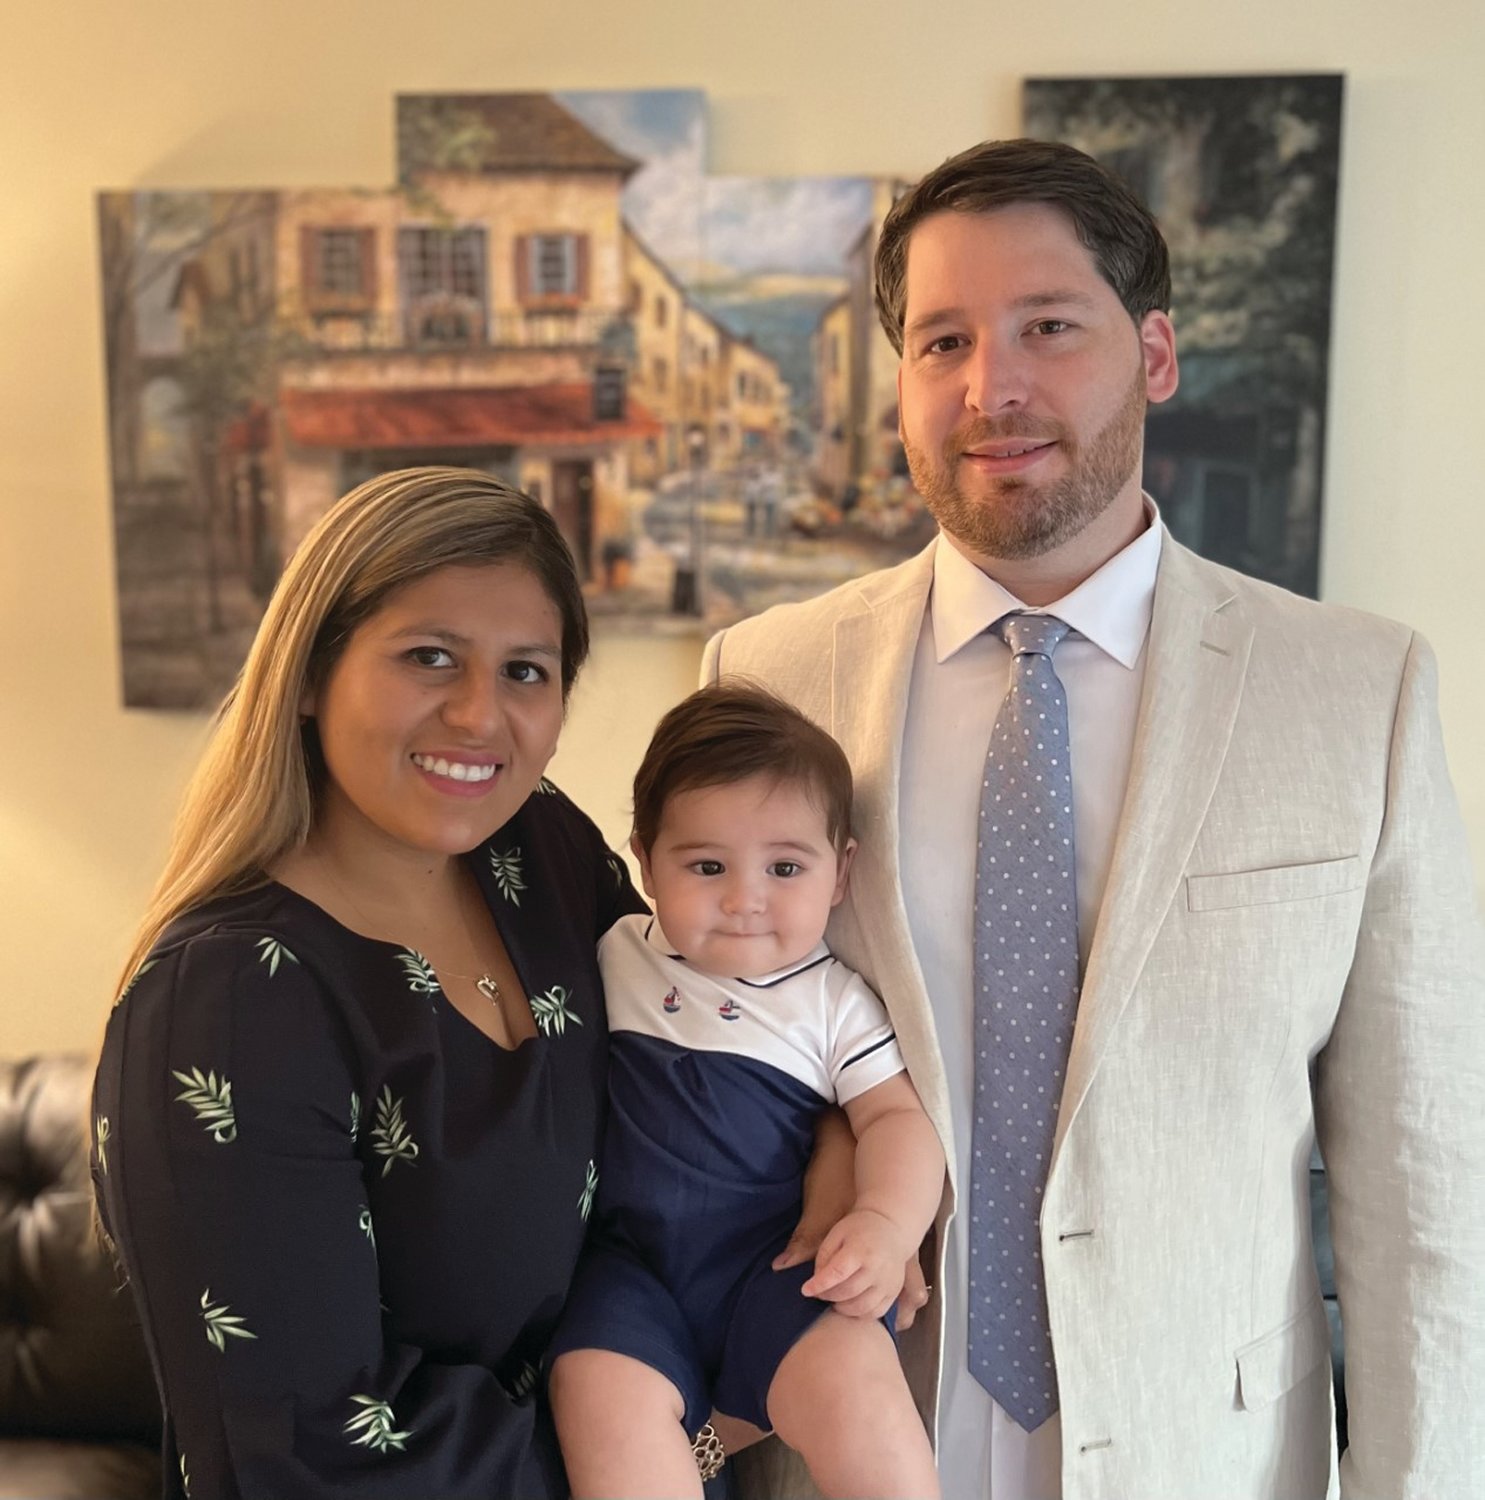 POLITICALLY MOTIVATED?  Dennis and his wife Argilda Jackelin Cardillo pose for a family photo with their young child. Dennis Cardillo’s uncle, the sitting District 42 state Rep. Edward T. Cardillo Jr., has accused the challenger of residing outside the district and lying on election forms.